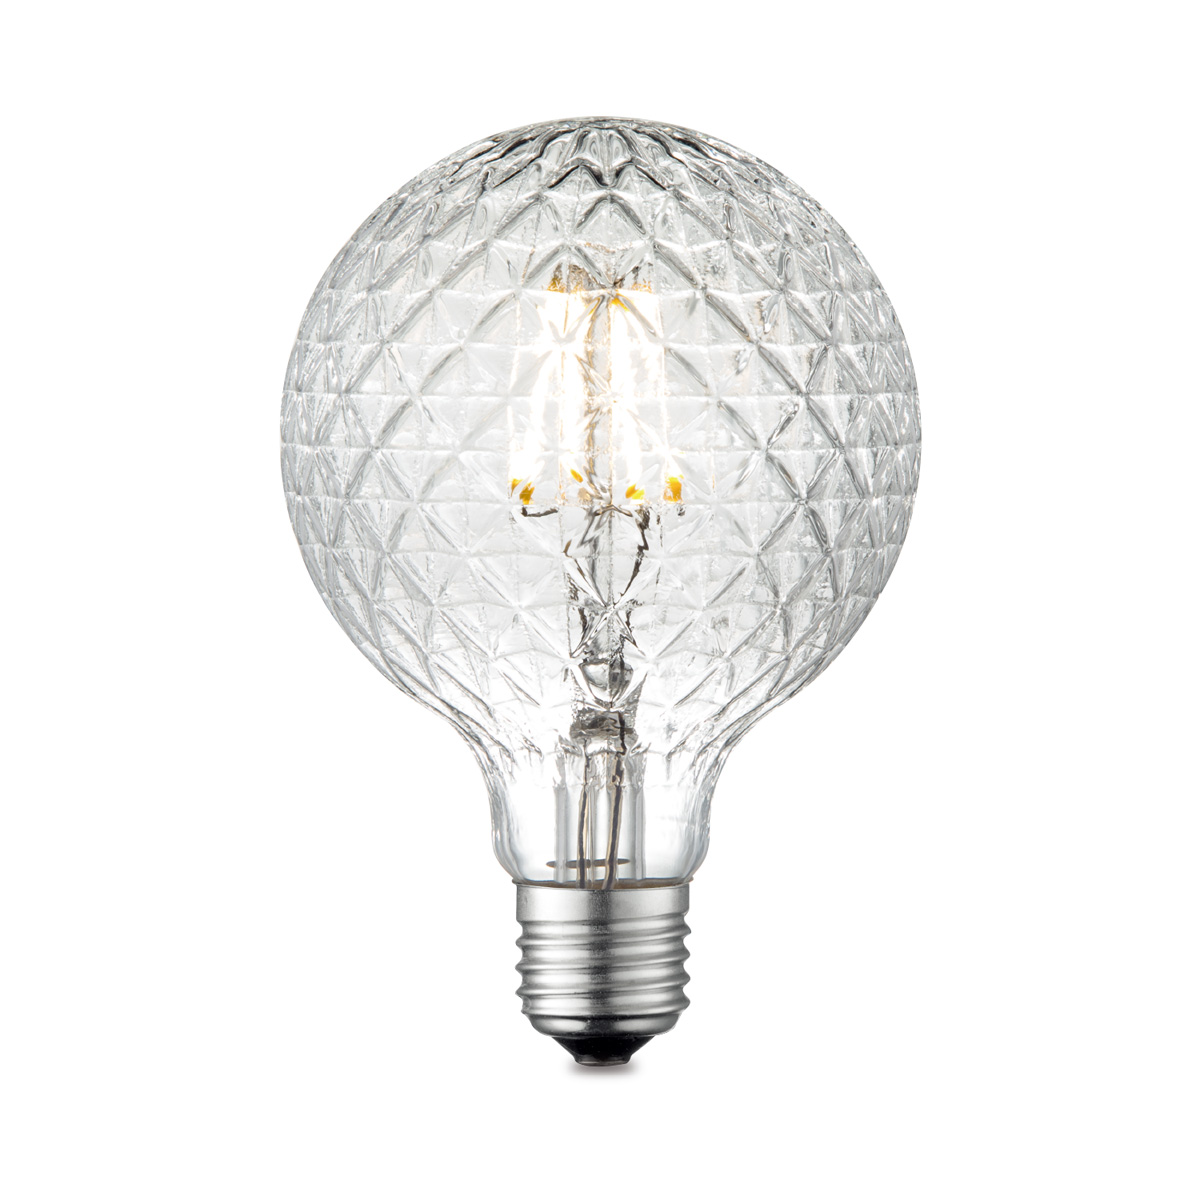 Tangla lighting - TLB-8071-04CL - LED Light Bulb Single Spiral Deco filament - G95 4W clear - dimmable - pineapple - E27